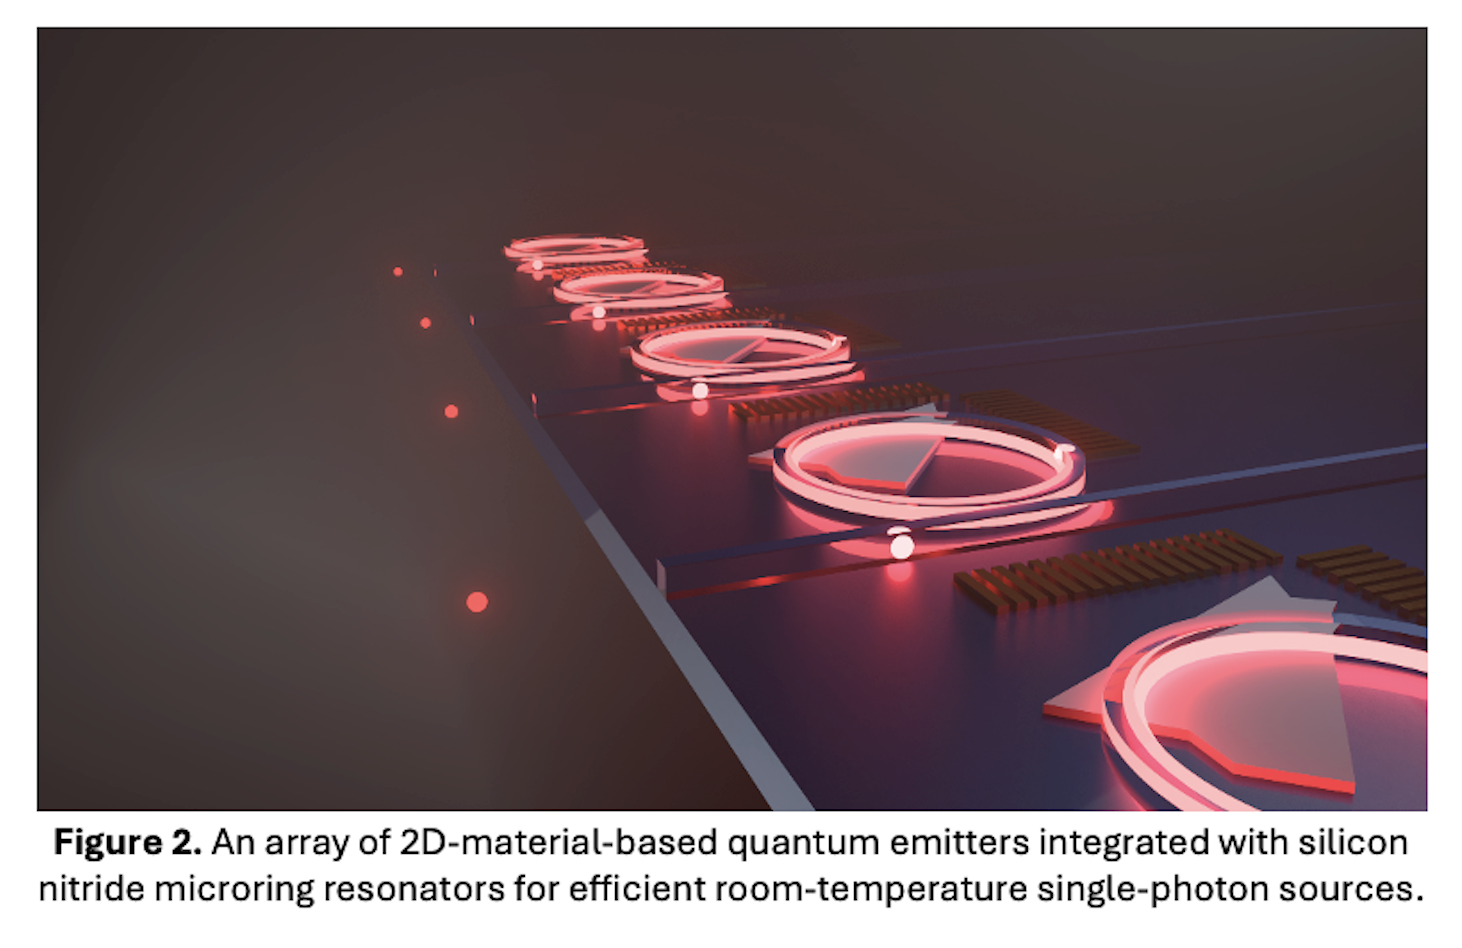 An Array of 2D material based quantum emitters integrated with silicon nitride microring resonators